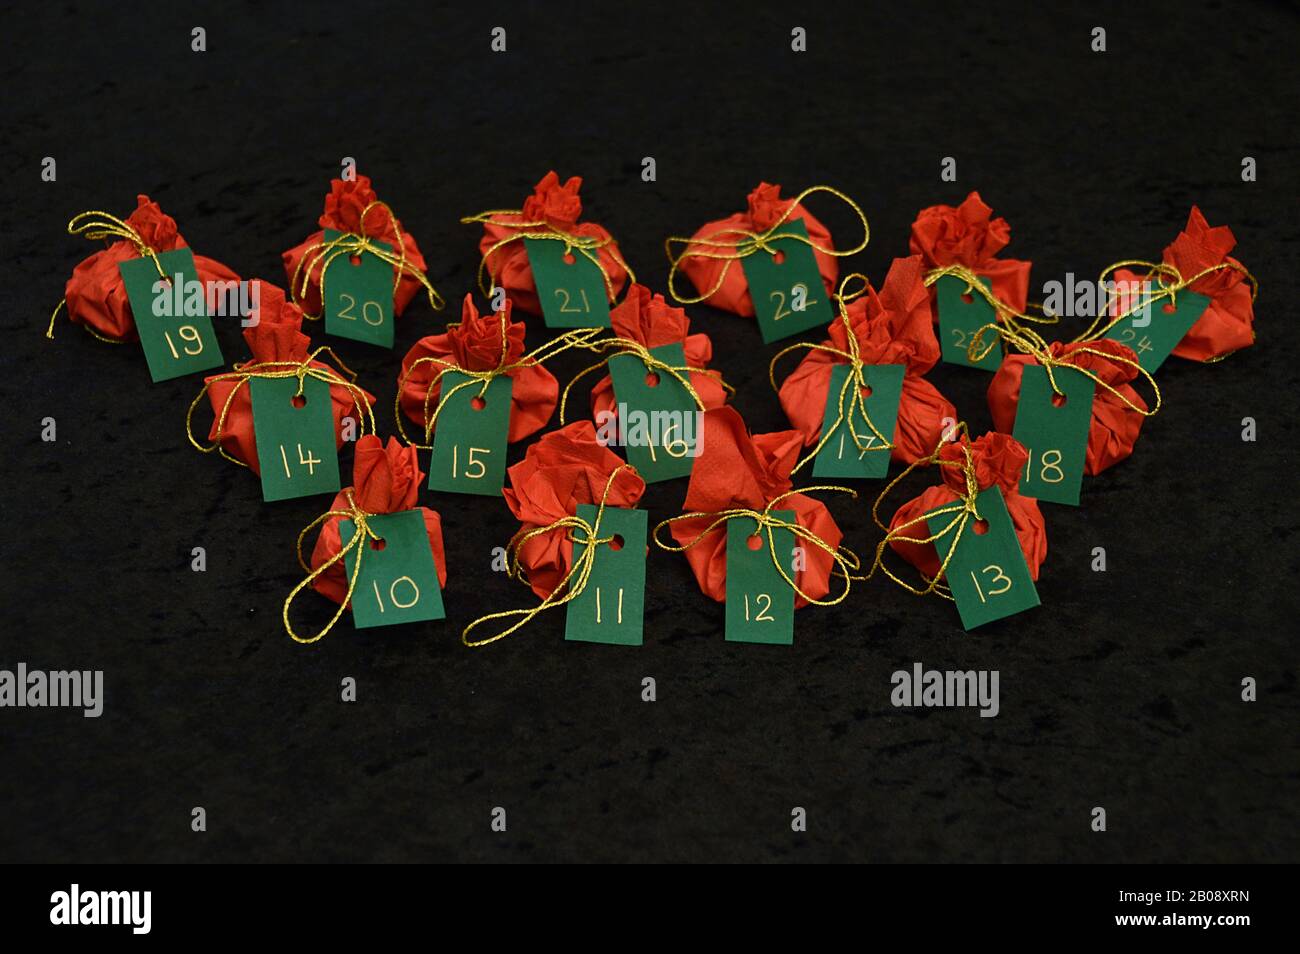 Twenty four little presents wrapped in red, green tags golden numbers from 1 to 24 on black as self made advent calendar - 10th of December Stock Photo